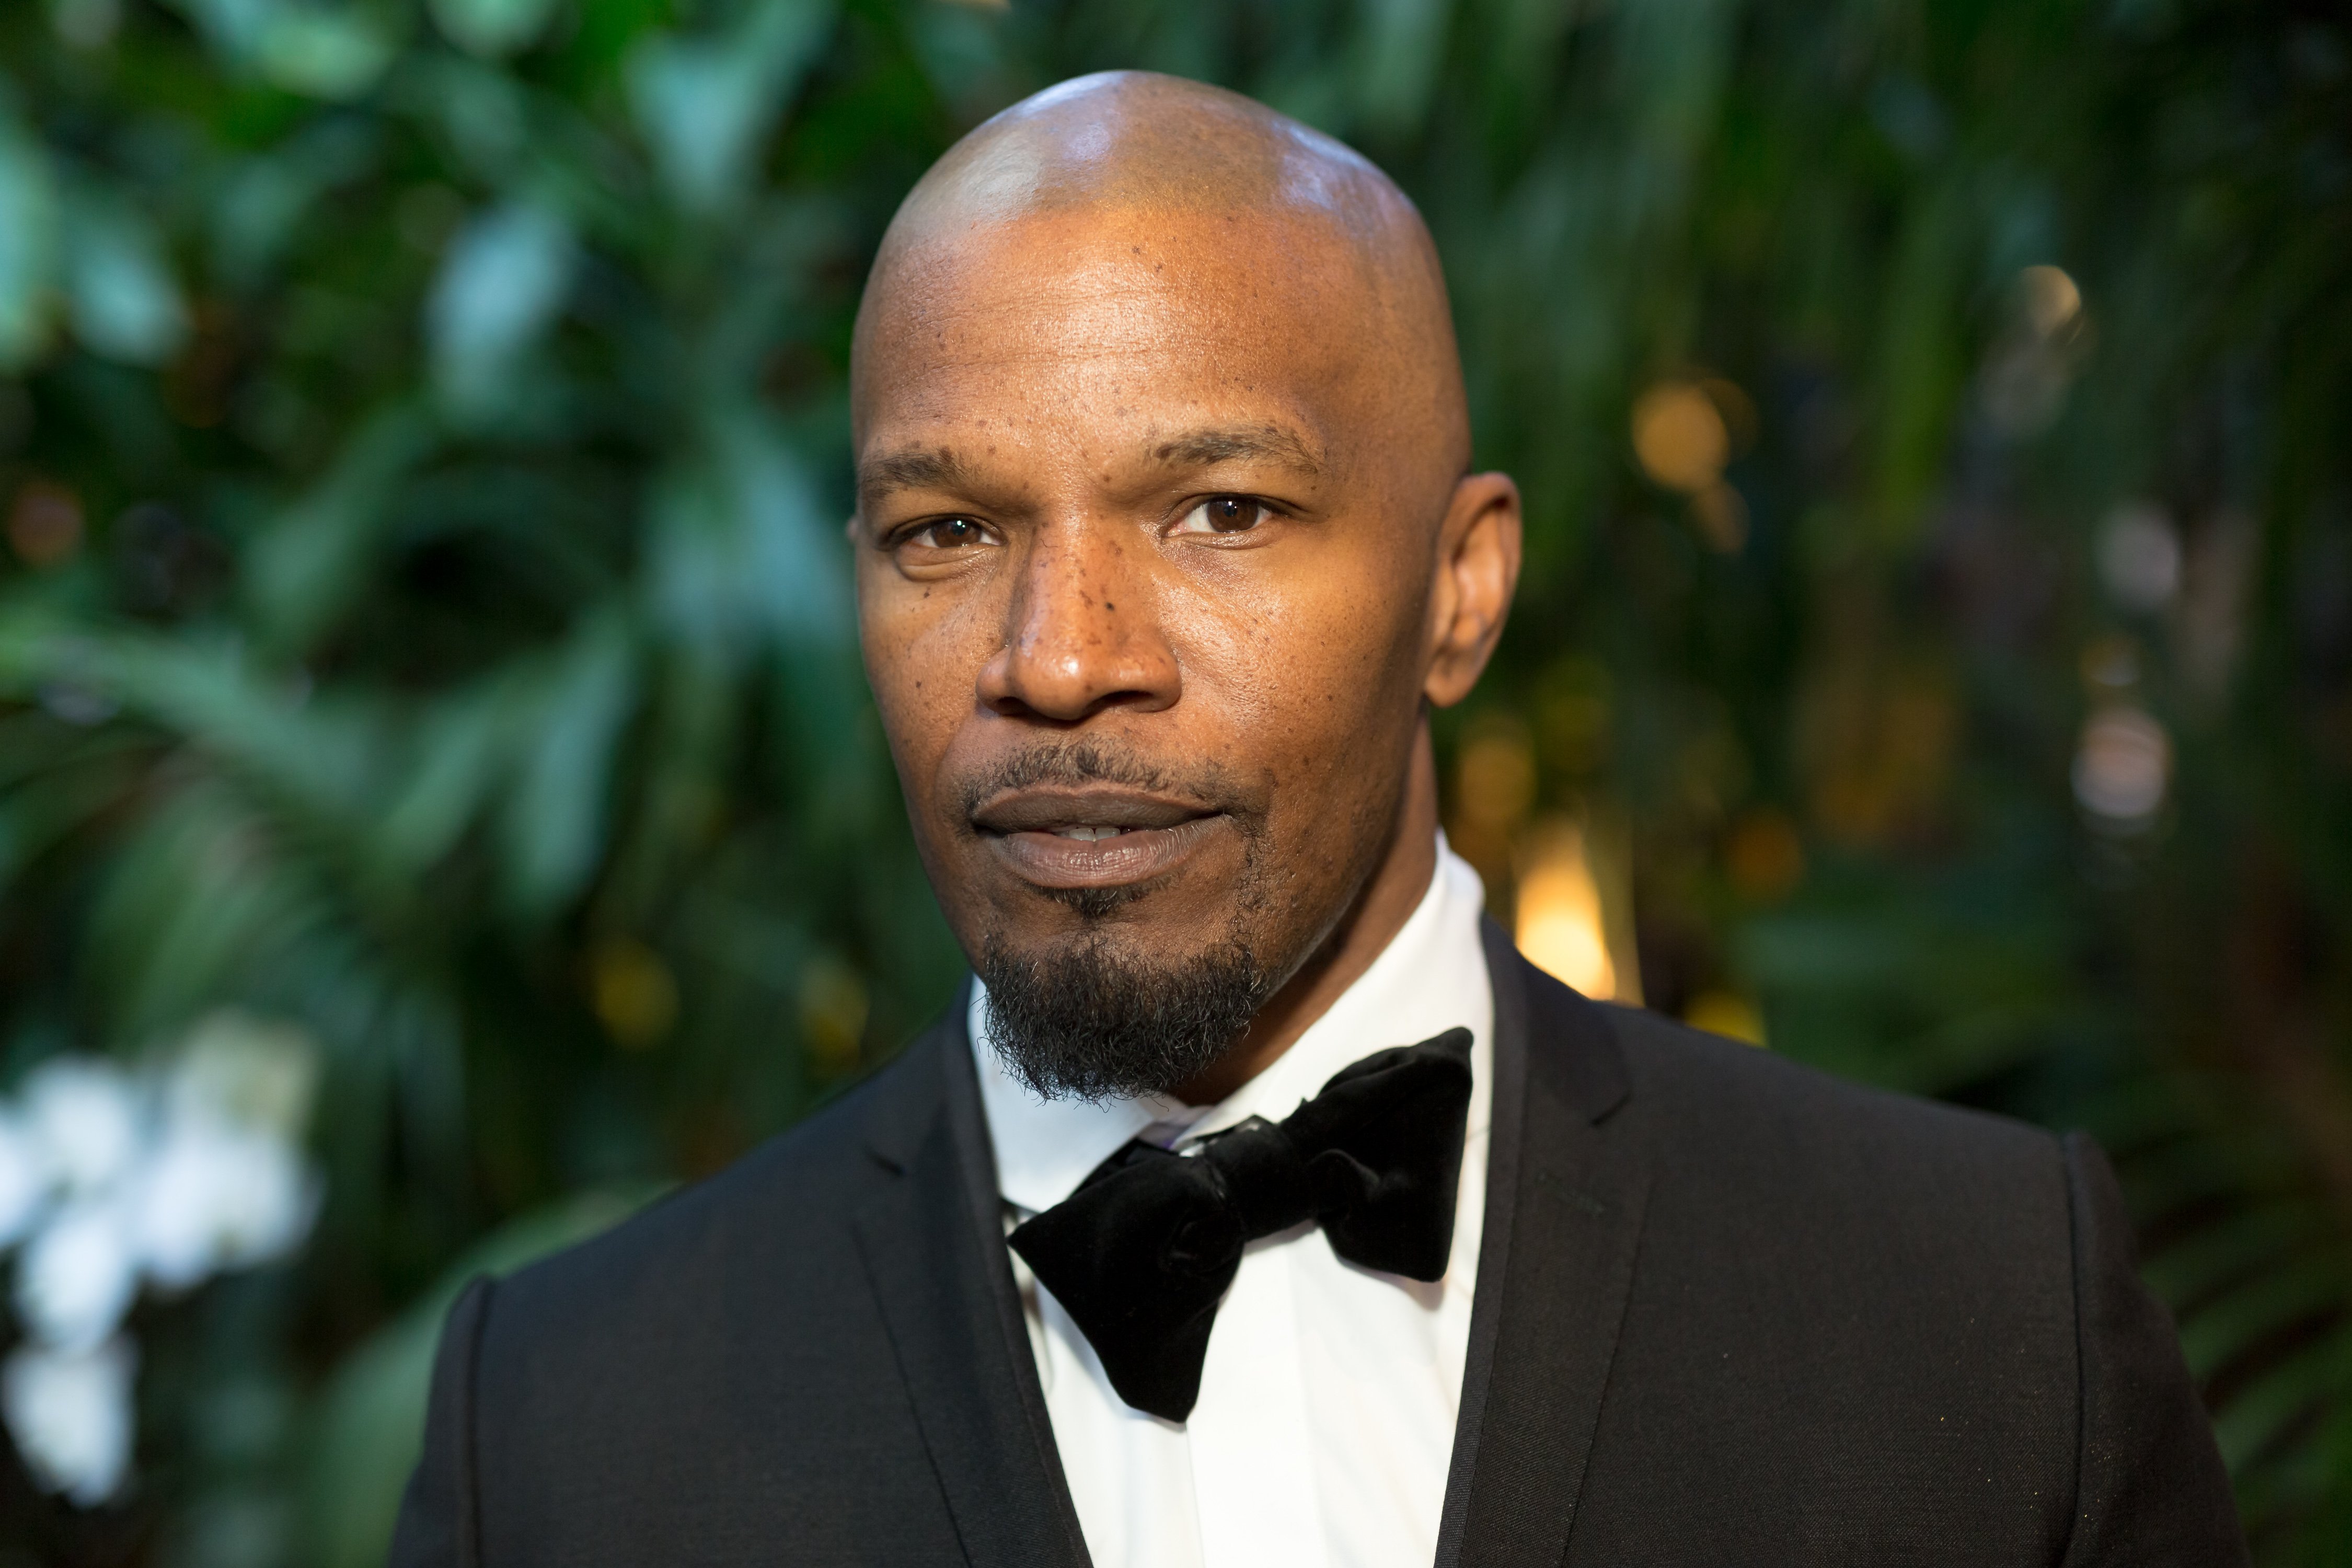 Jamie Foxx at the Mercedez-Benz USA's Official Awards Viewing Party on March 4, 2018 in Los Angeles | Photo: Getty Images